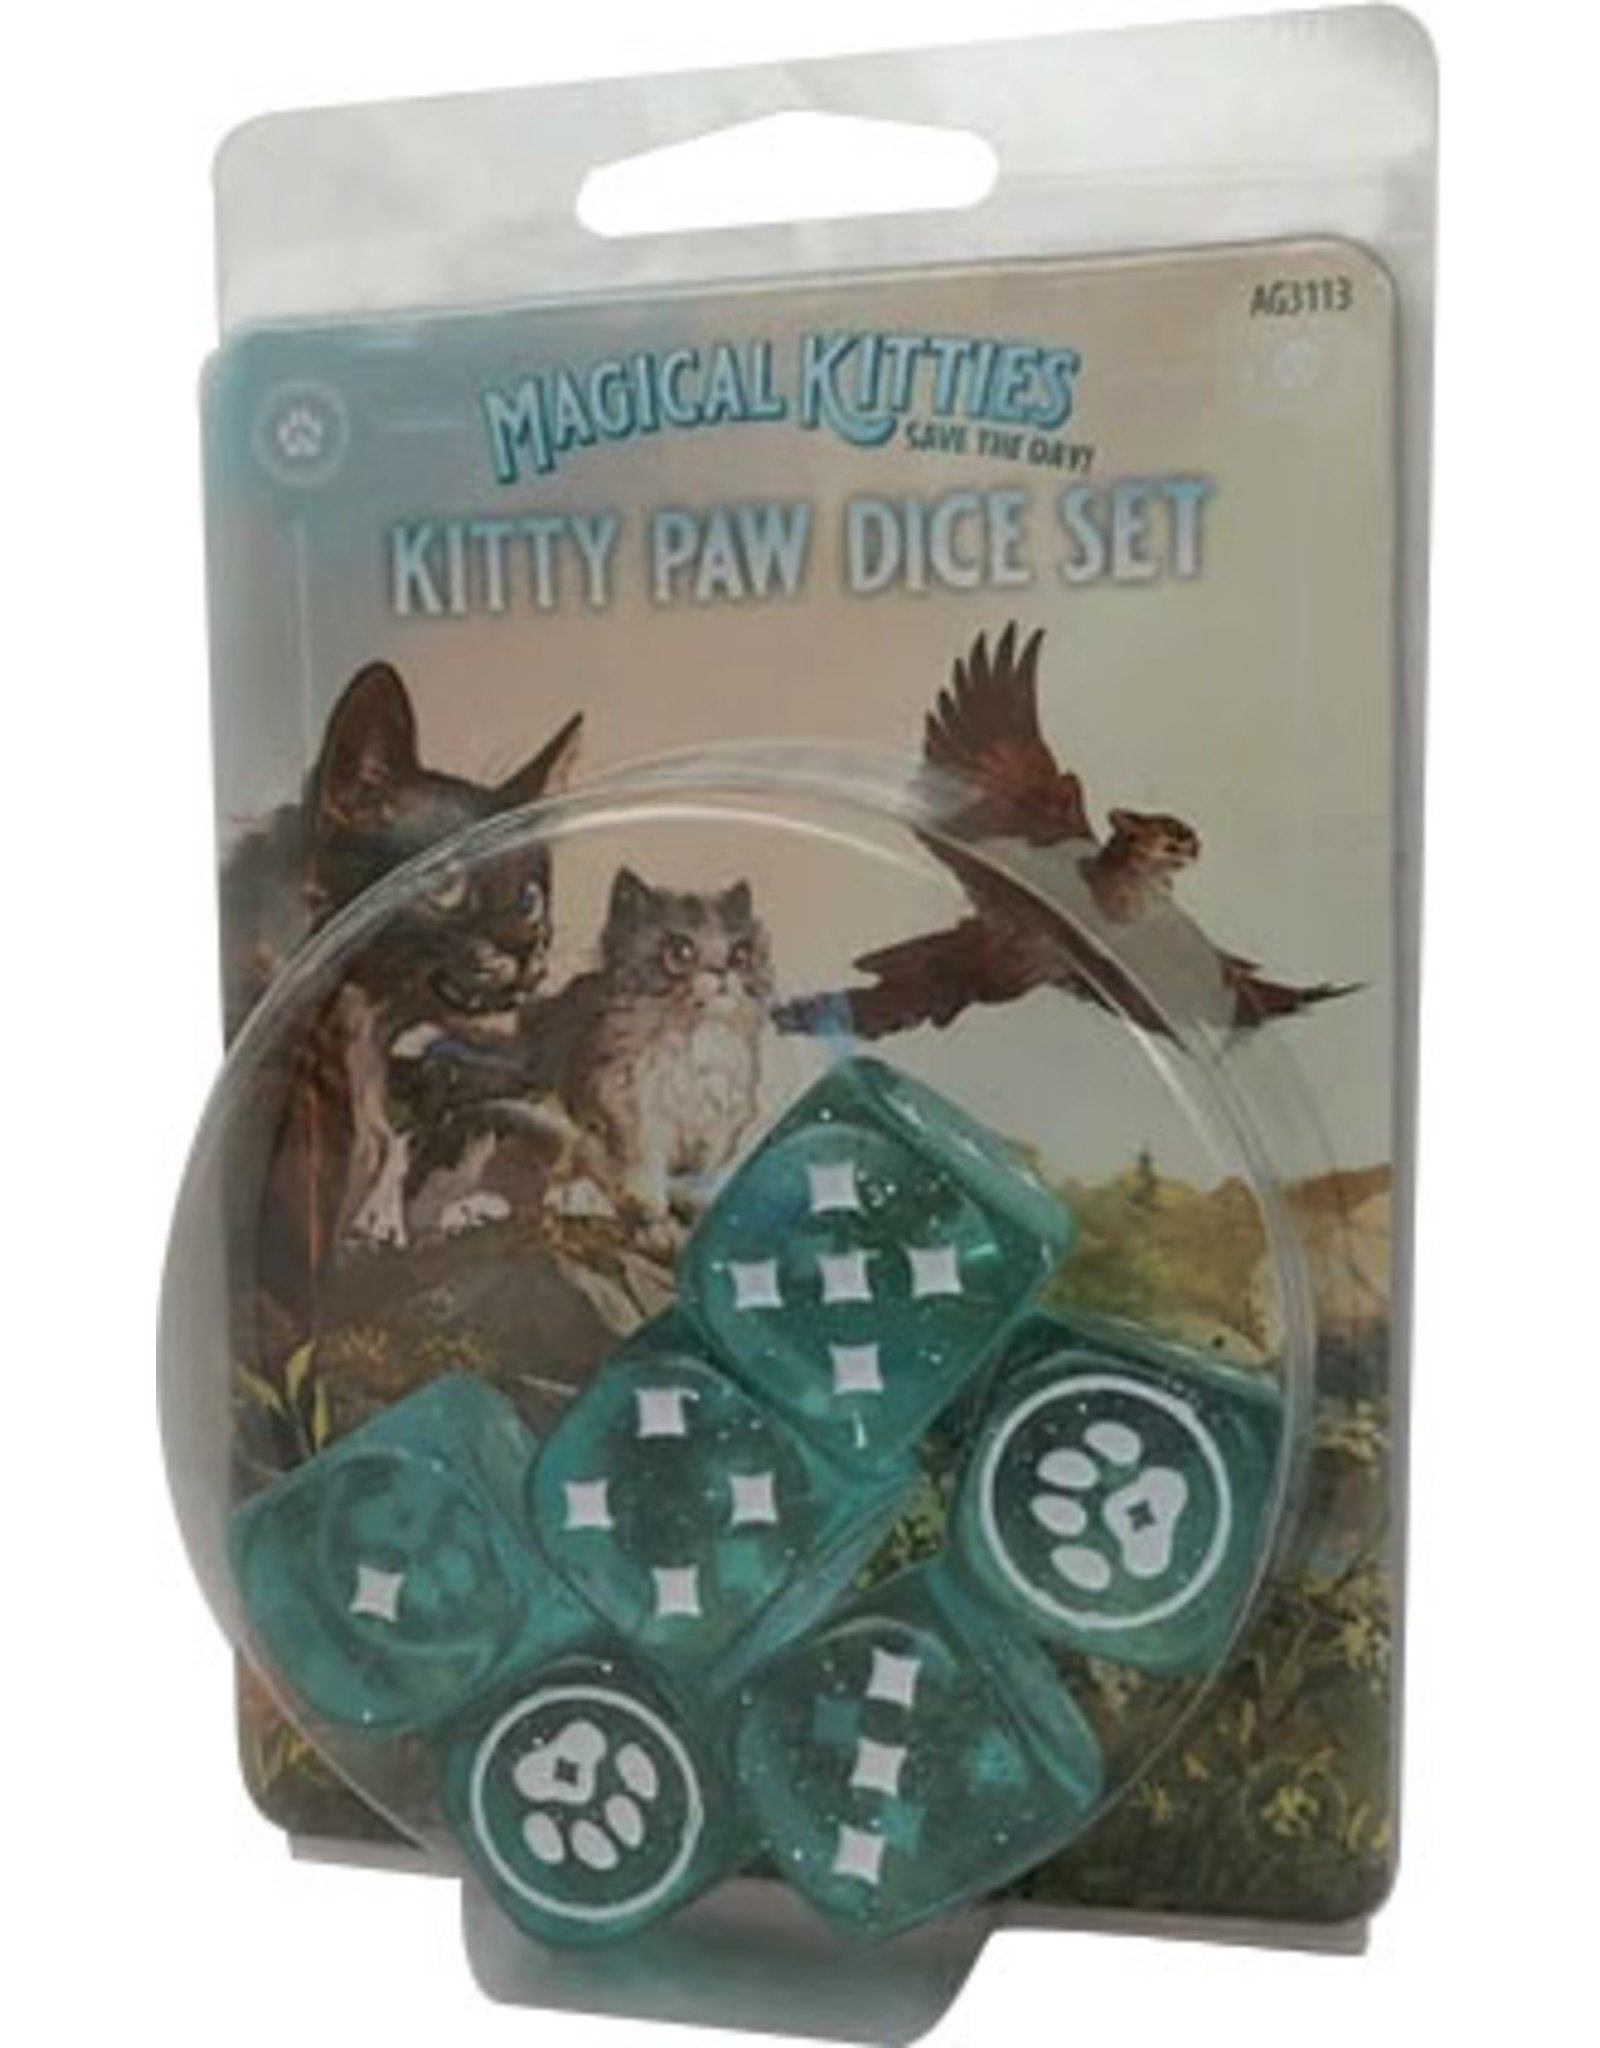 Atlas Games Magical Kitties Save the Day! RPG: d6 20mm Kitty Paw Dice Set (6)